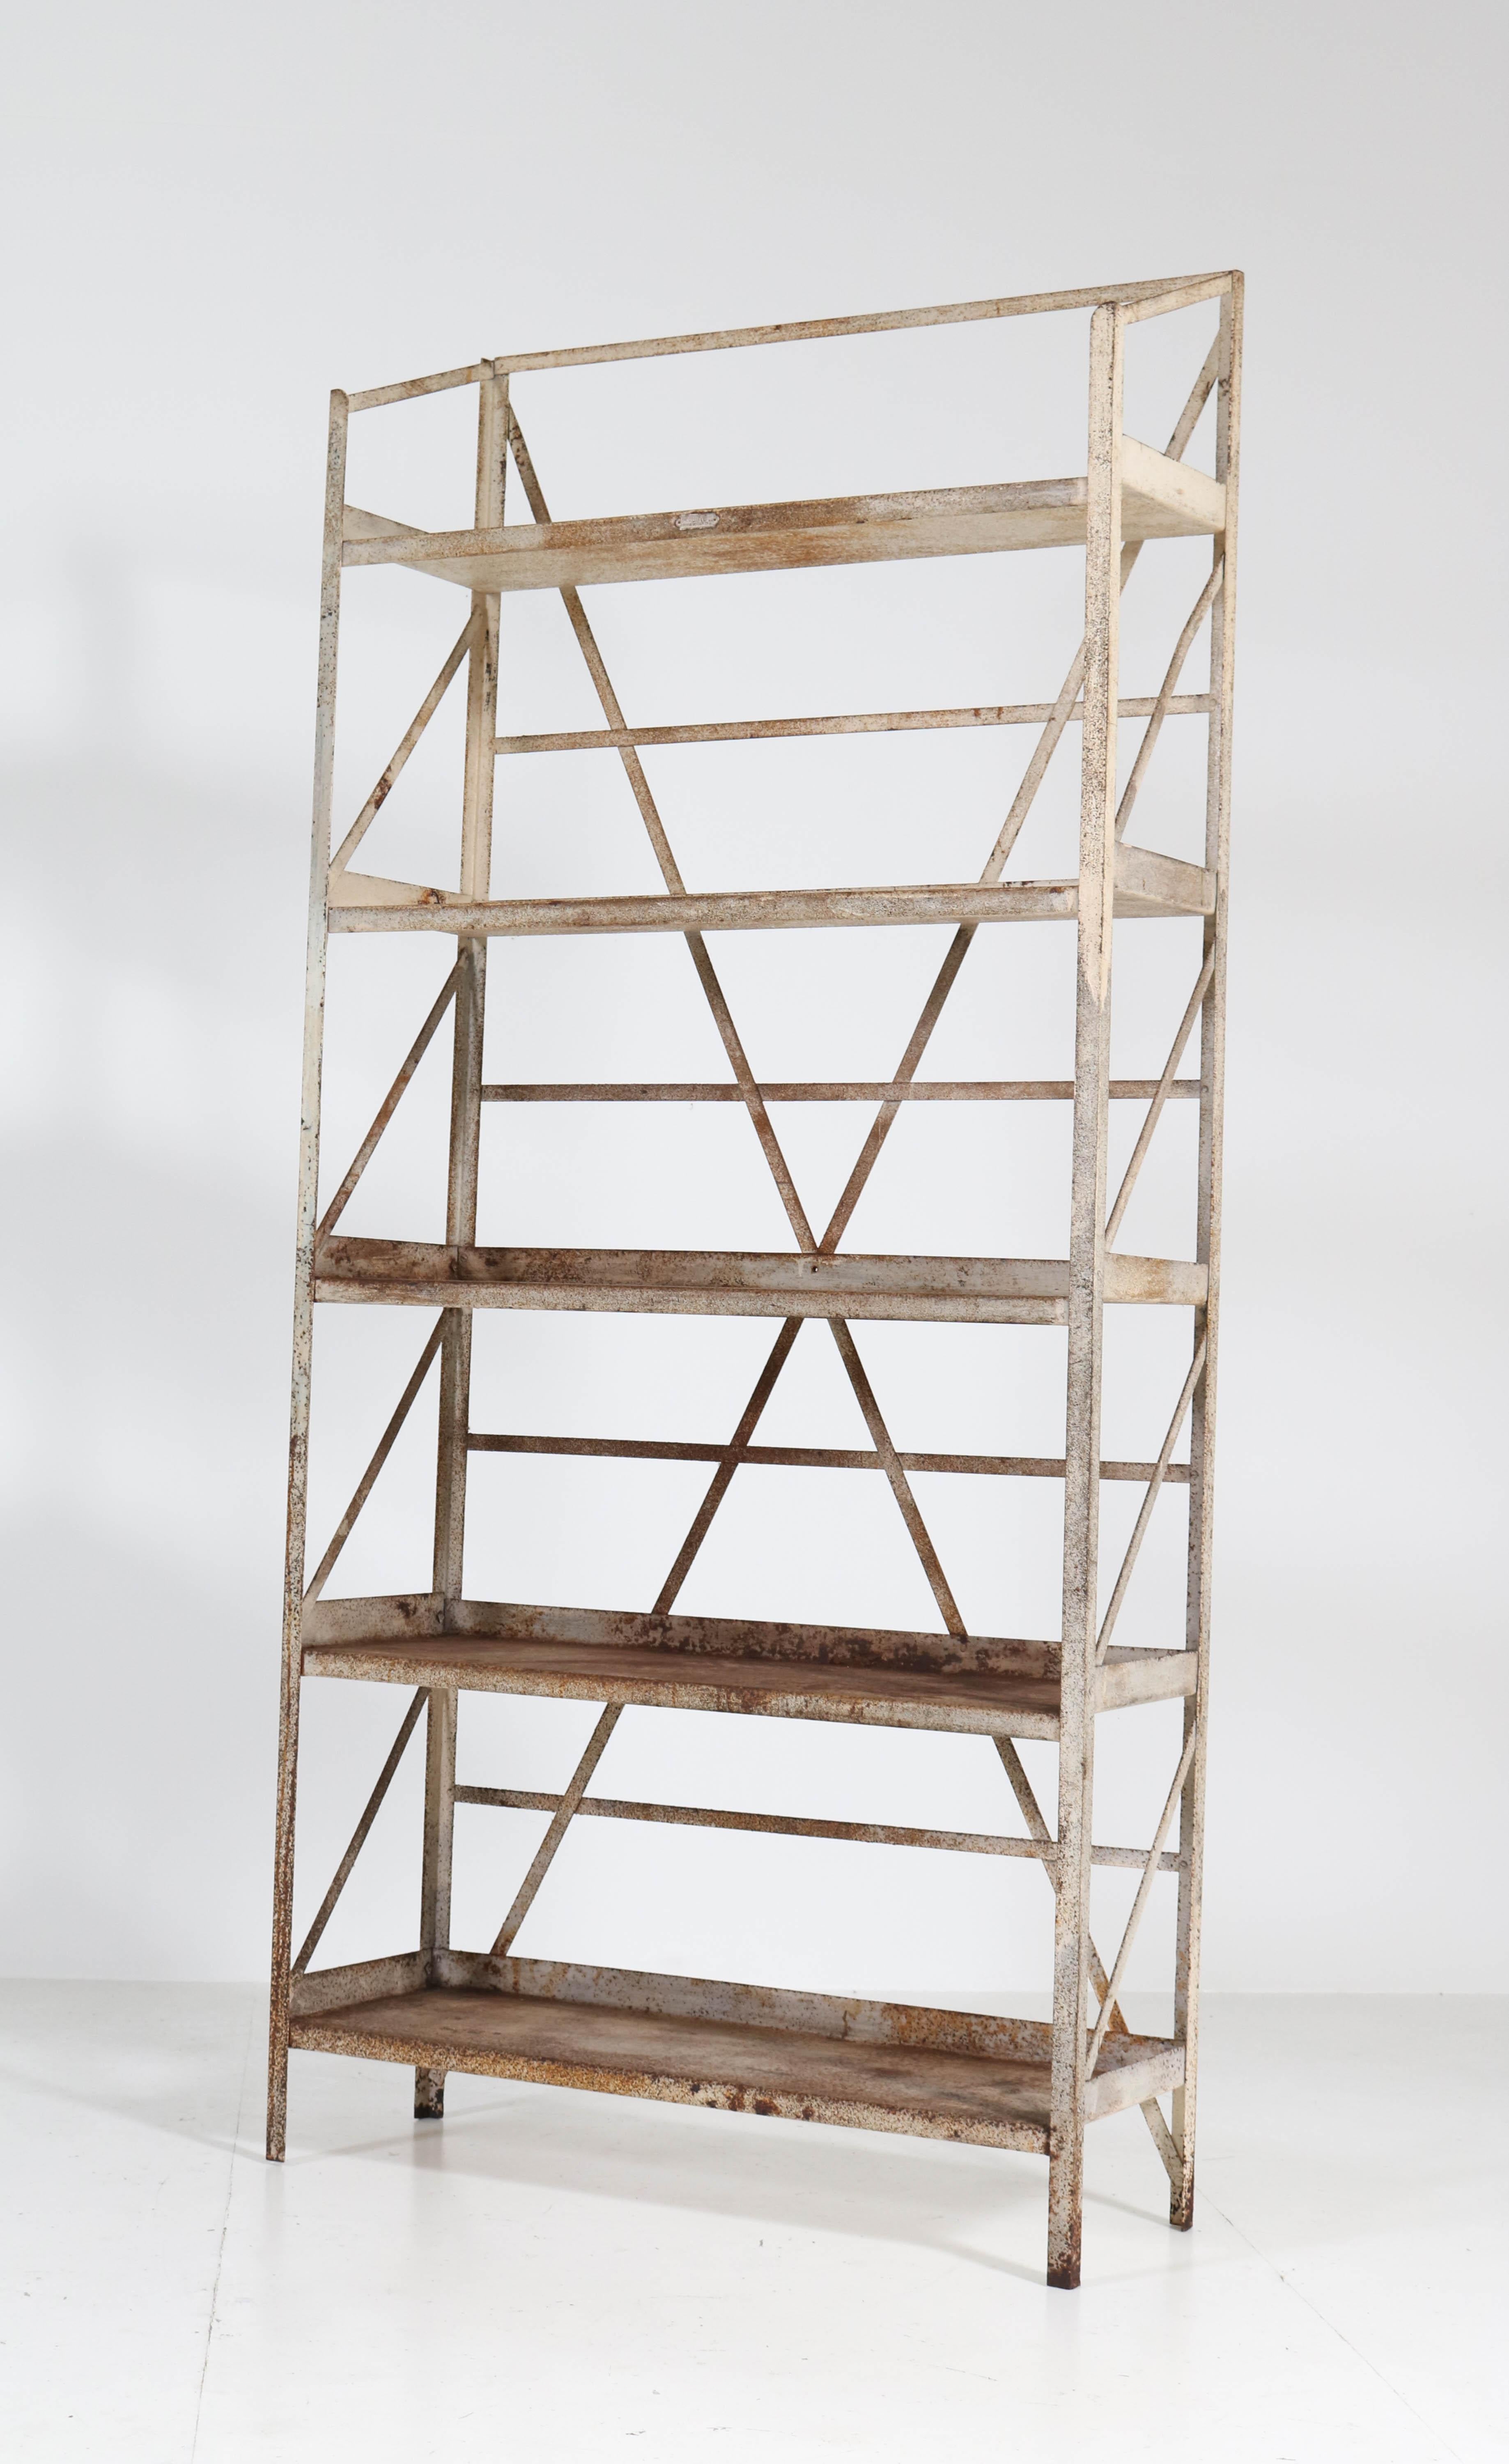 Stunning and rare Industrial shelving unit or storage rack.
Design by Fa. Koller & Van Os, Amsterdam.
Striking Dutch design from the 1930s.
Welded-steel frame with a nice patina of oxidation and other wear-and-tear from
years of use.
Marked